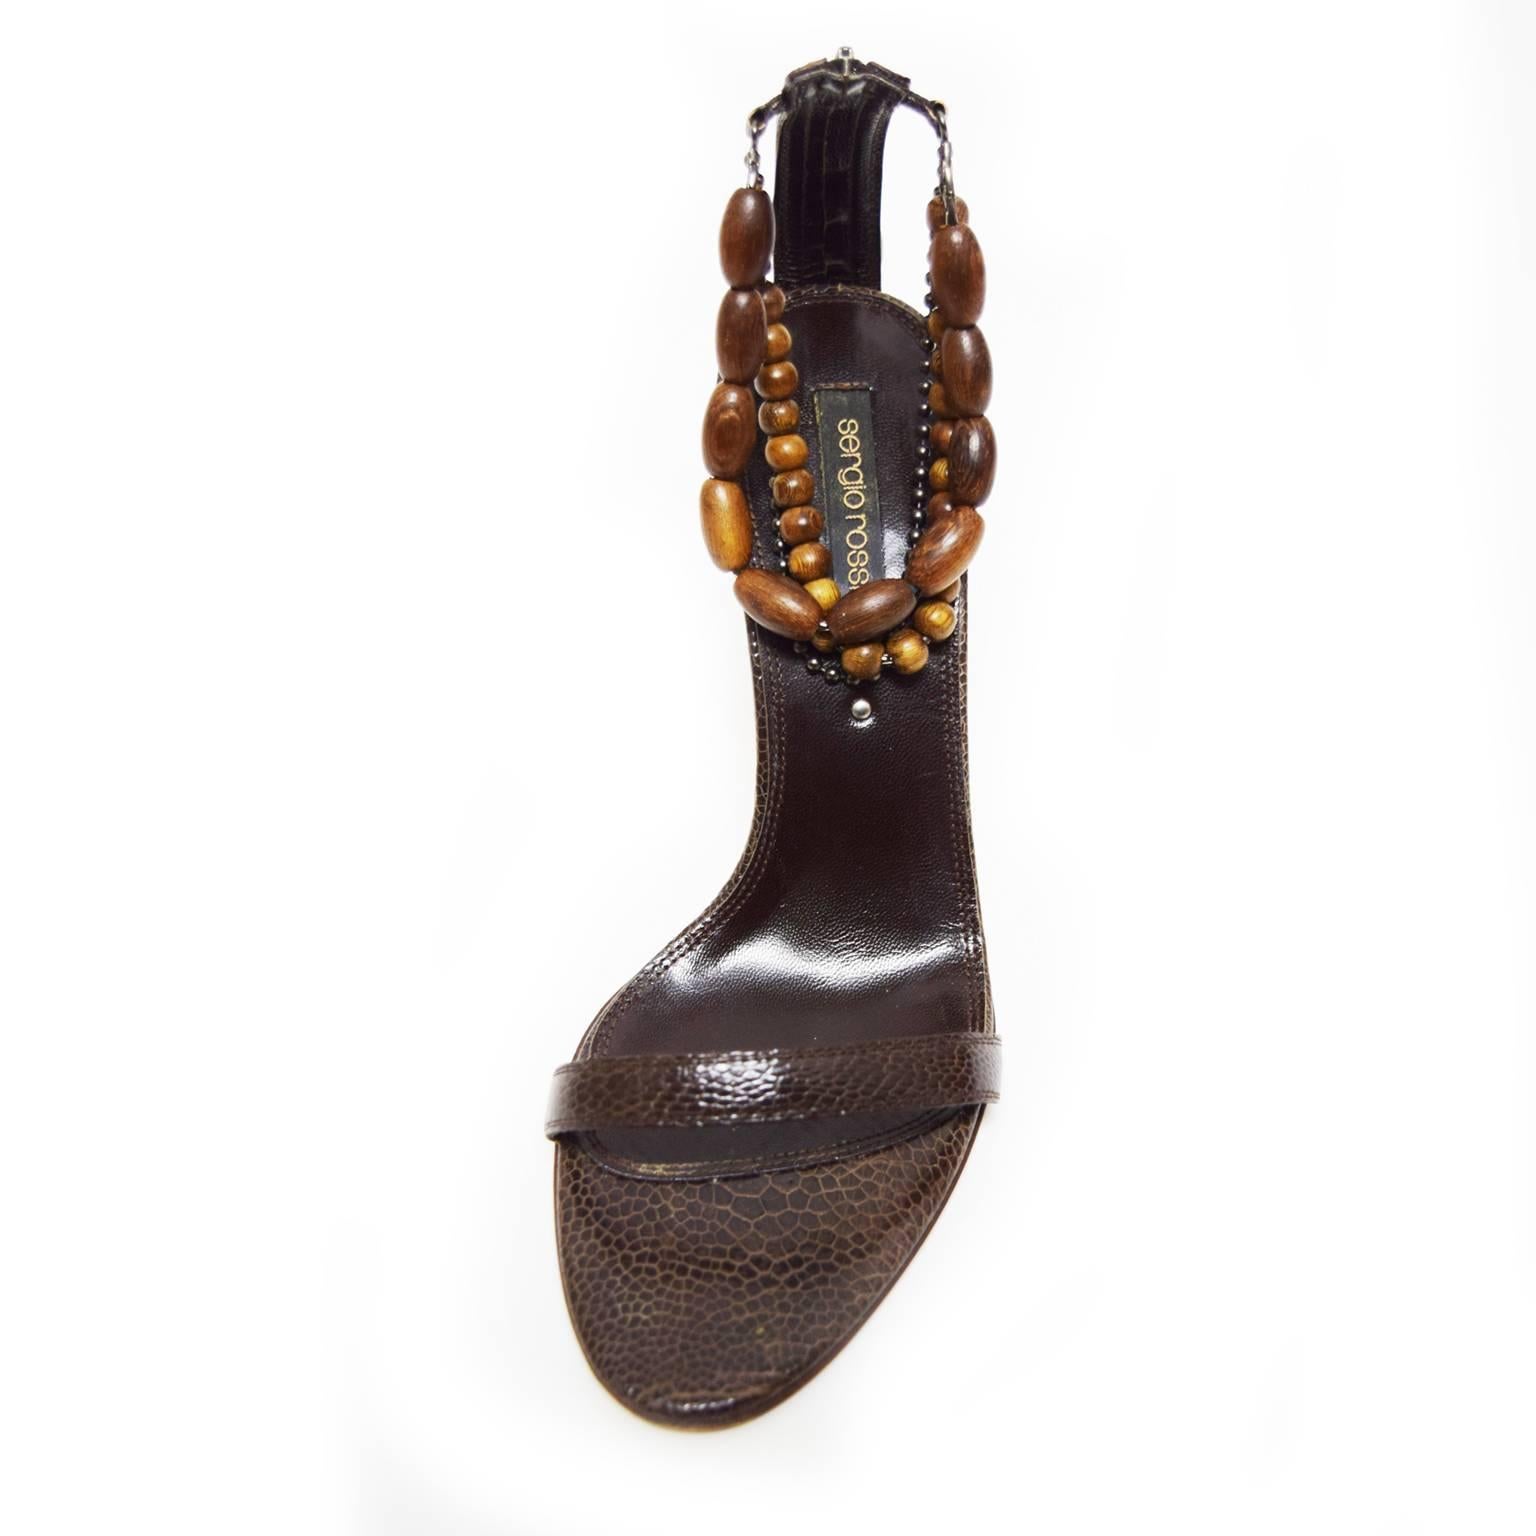 These one of a kind pumps designed by Sergio Rossi are to die for! Made out of rich deep brown reptile leather for the sole and toe strap upper, the ankle strap is embellished with multiple  wooden beaded straps, and has a zipped back.